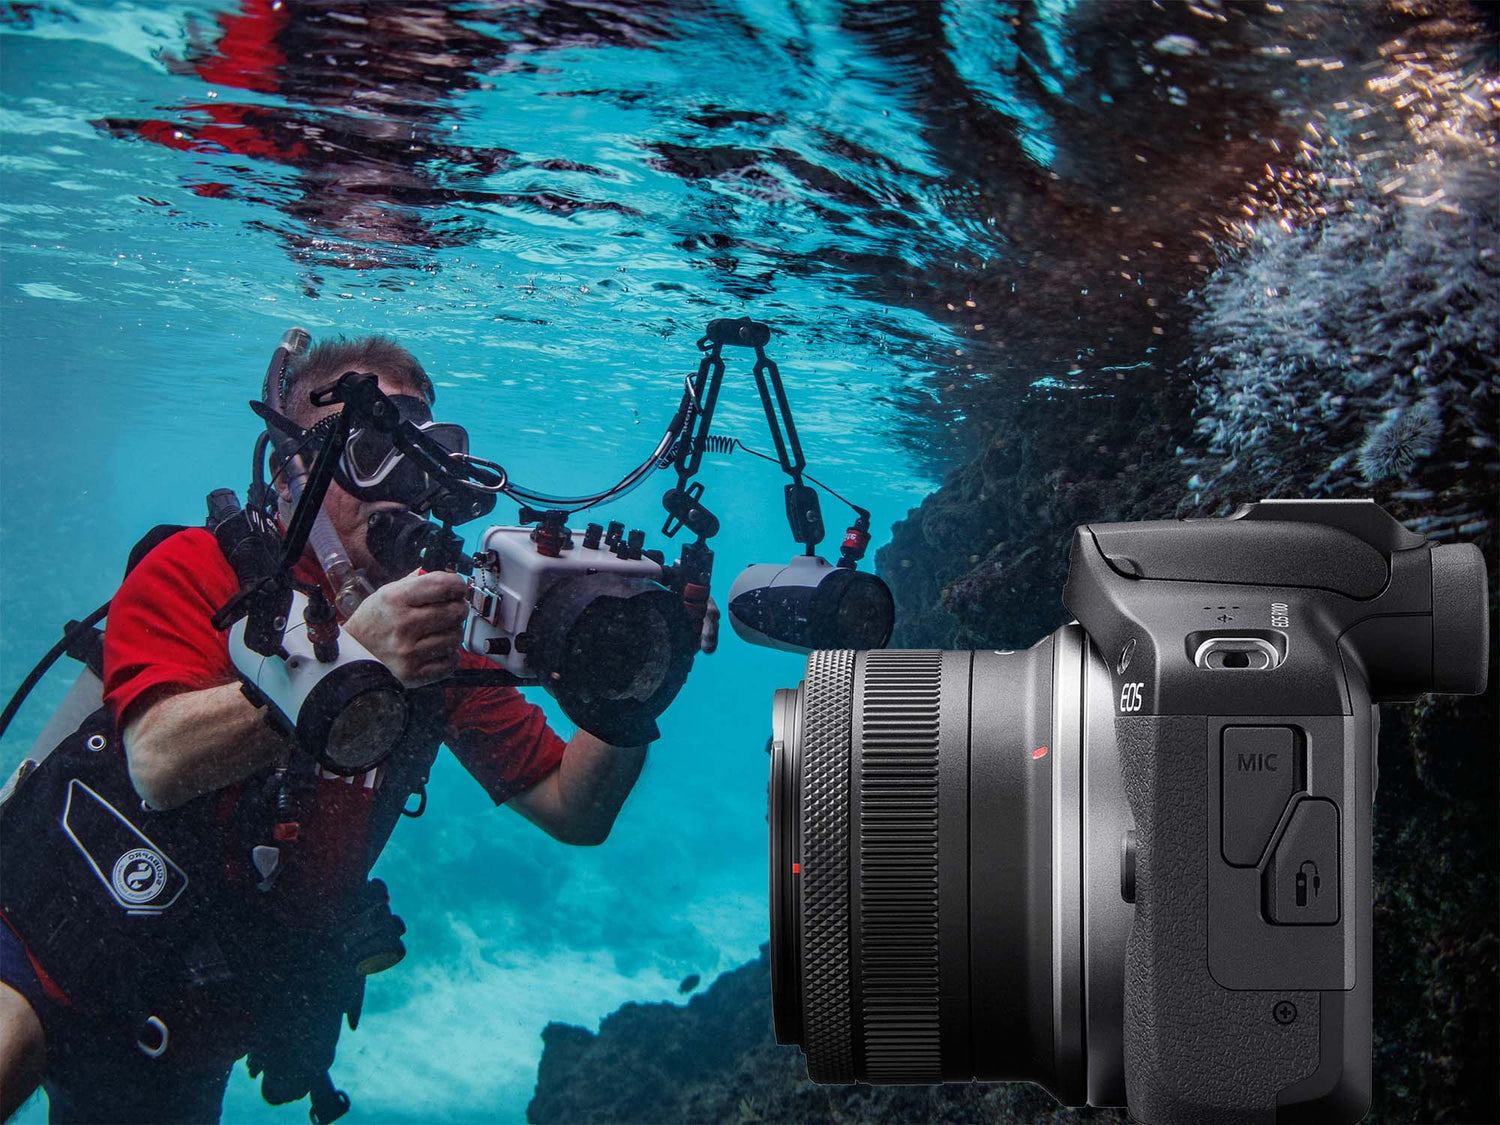 Canon RF 18-45mm f/4.5-6.3 IS STM Lens for Underwater Photography Review & Results